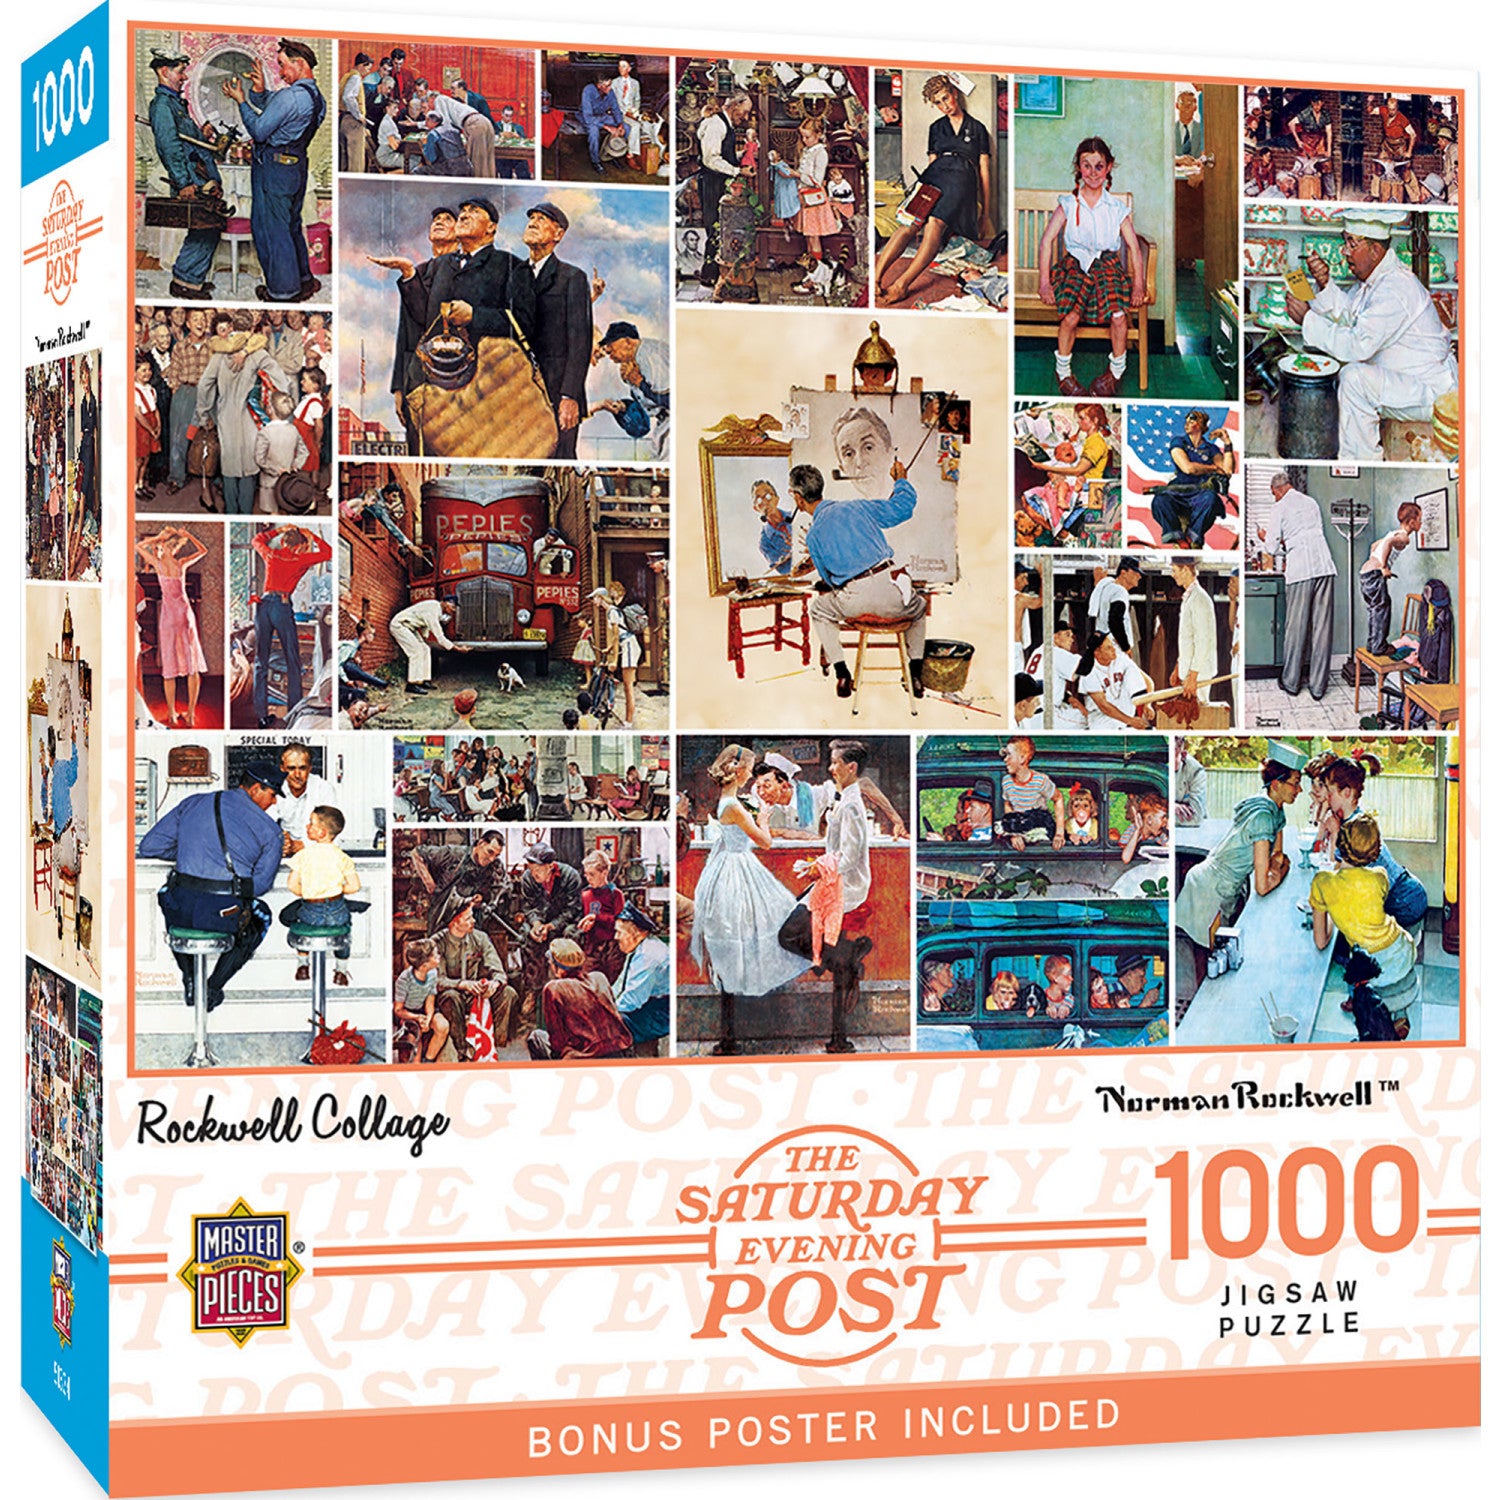 Saturday Evening Post - Rockwell Collage 1000 Piece Jigsaw Puzzle